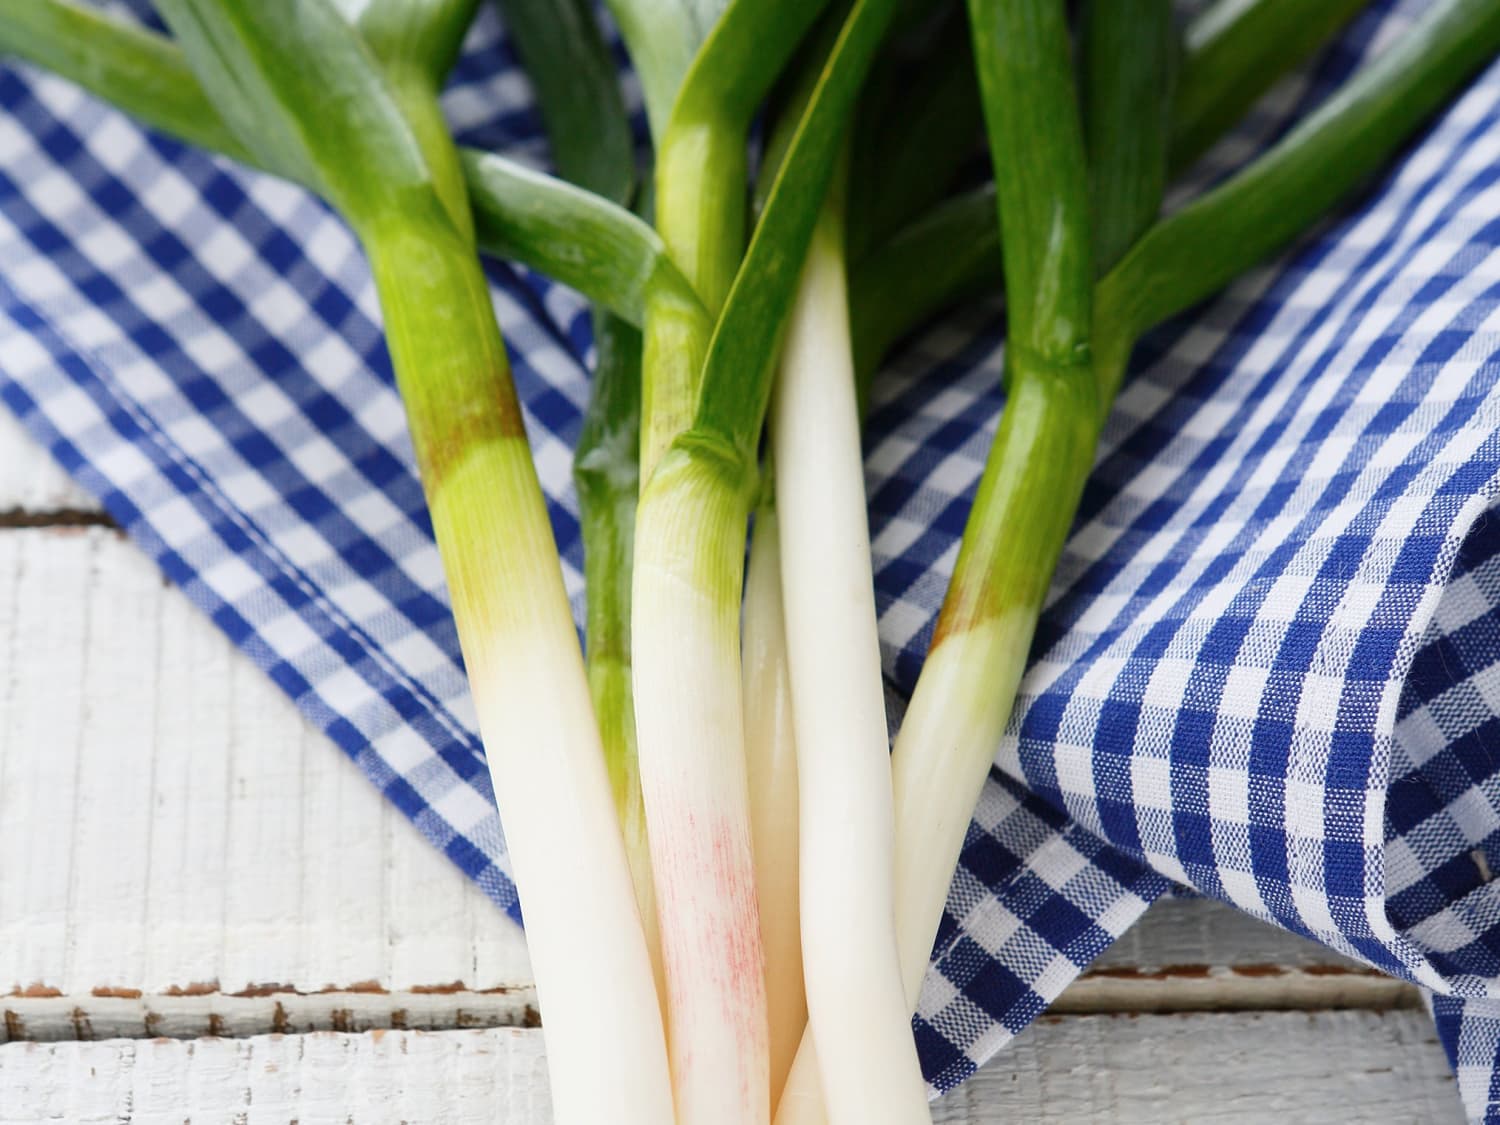 What Is Green Garlic? - How to Buy & Use Green Garlic